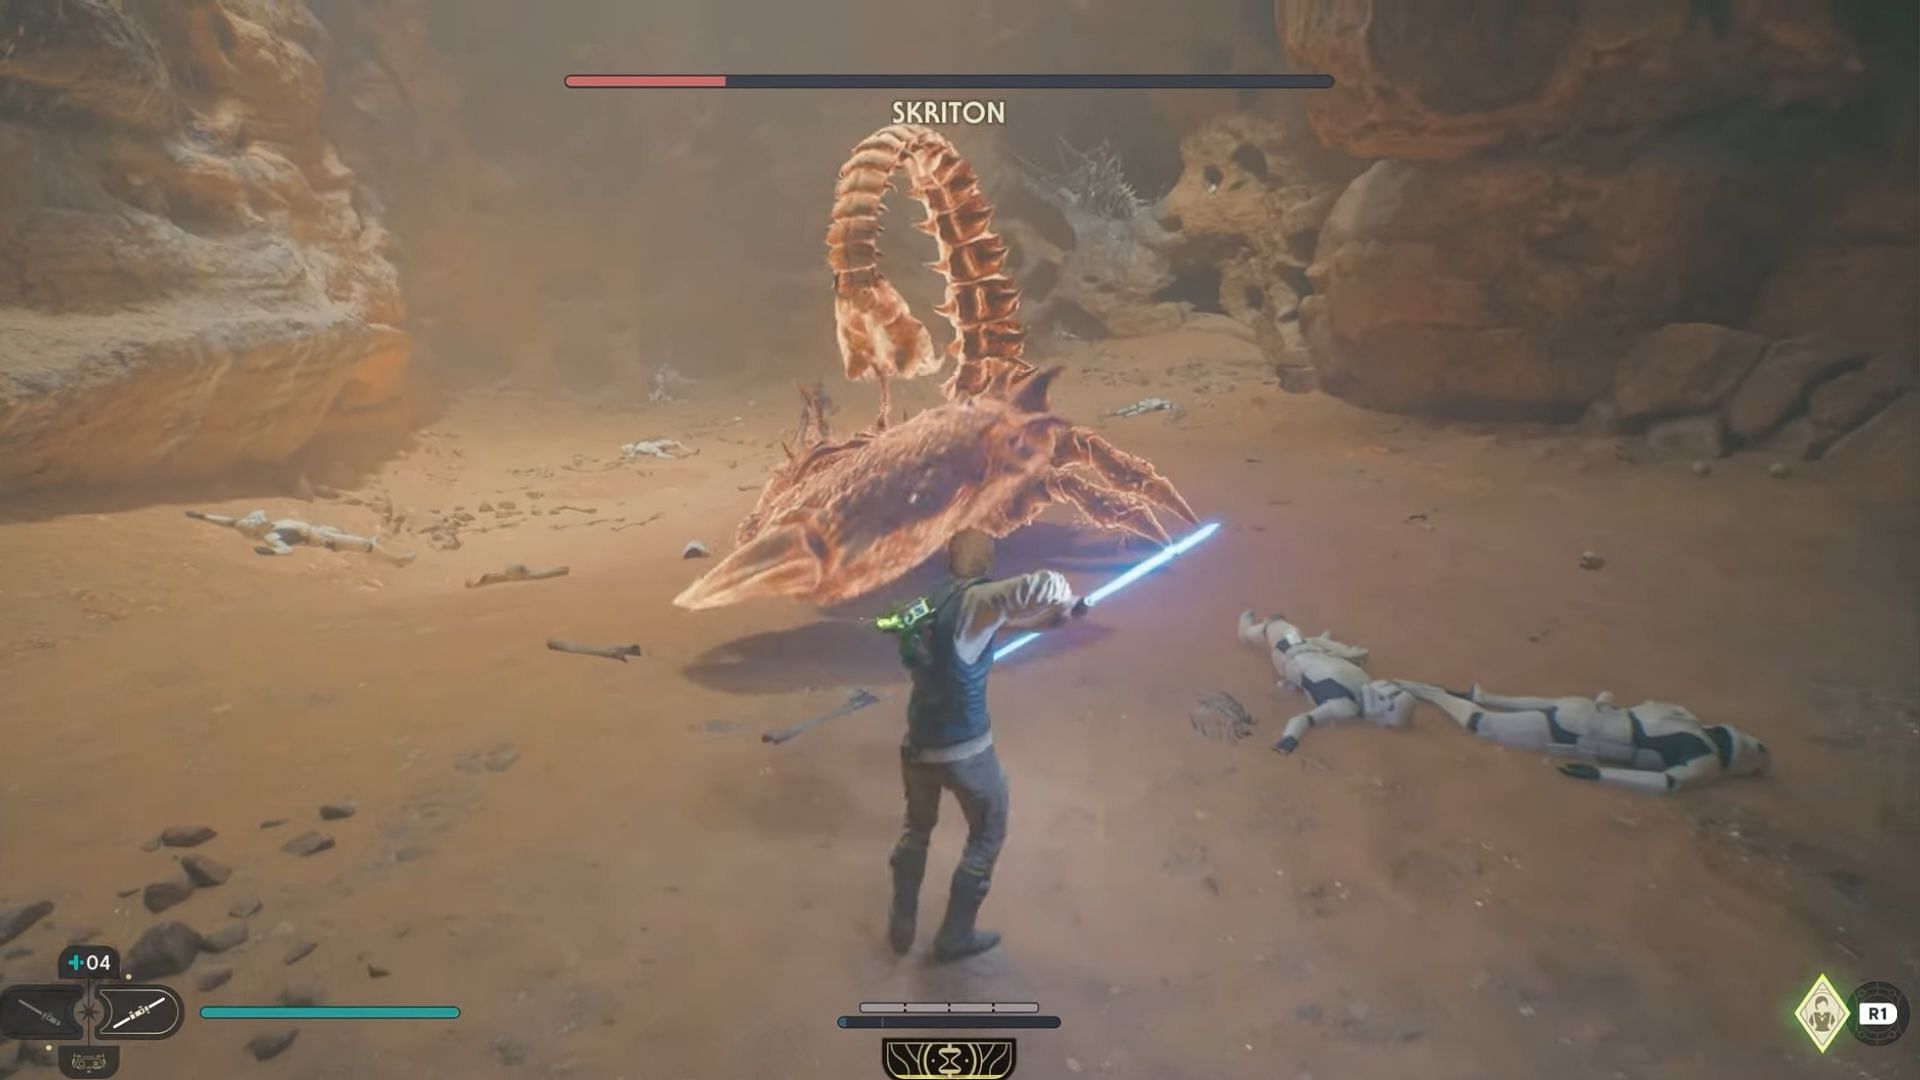 The Skriton glows red before executing the lunge attack (Image via Electronic Arts)